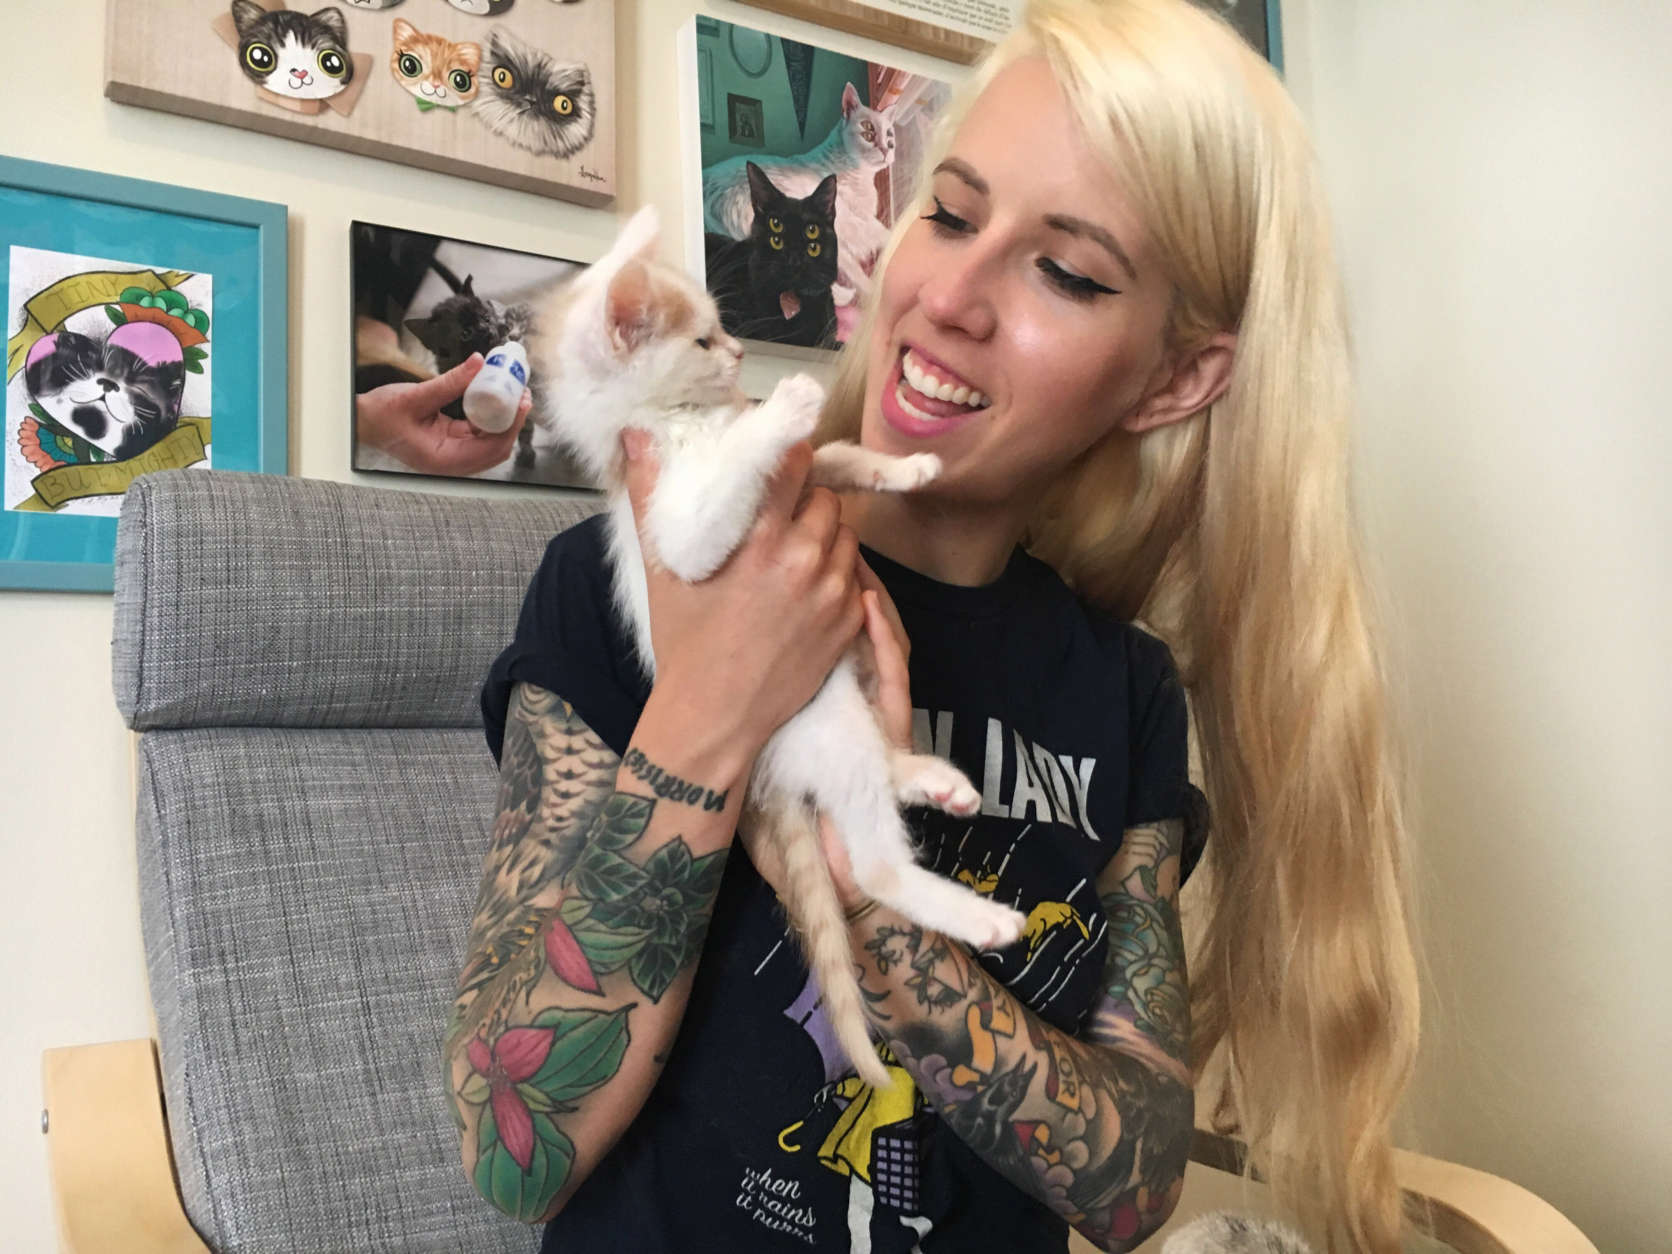 Hannah Shaw began helping neonatal kittens when she found one herself eight years ago. Since establishing "Kitten Lady," a website and organization dedicated to rescuing neonatal (the youngest) kittens, the Mt. Rainier, Maryland, resident figures she's taken in somewhere between 400 and 500 kittens. (WTOP/Kate Ryan)